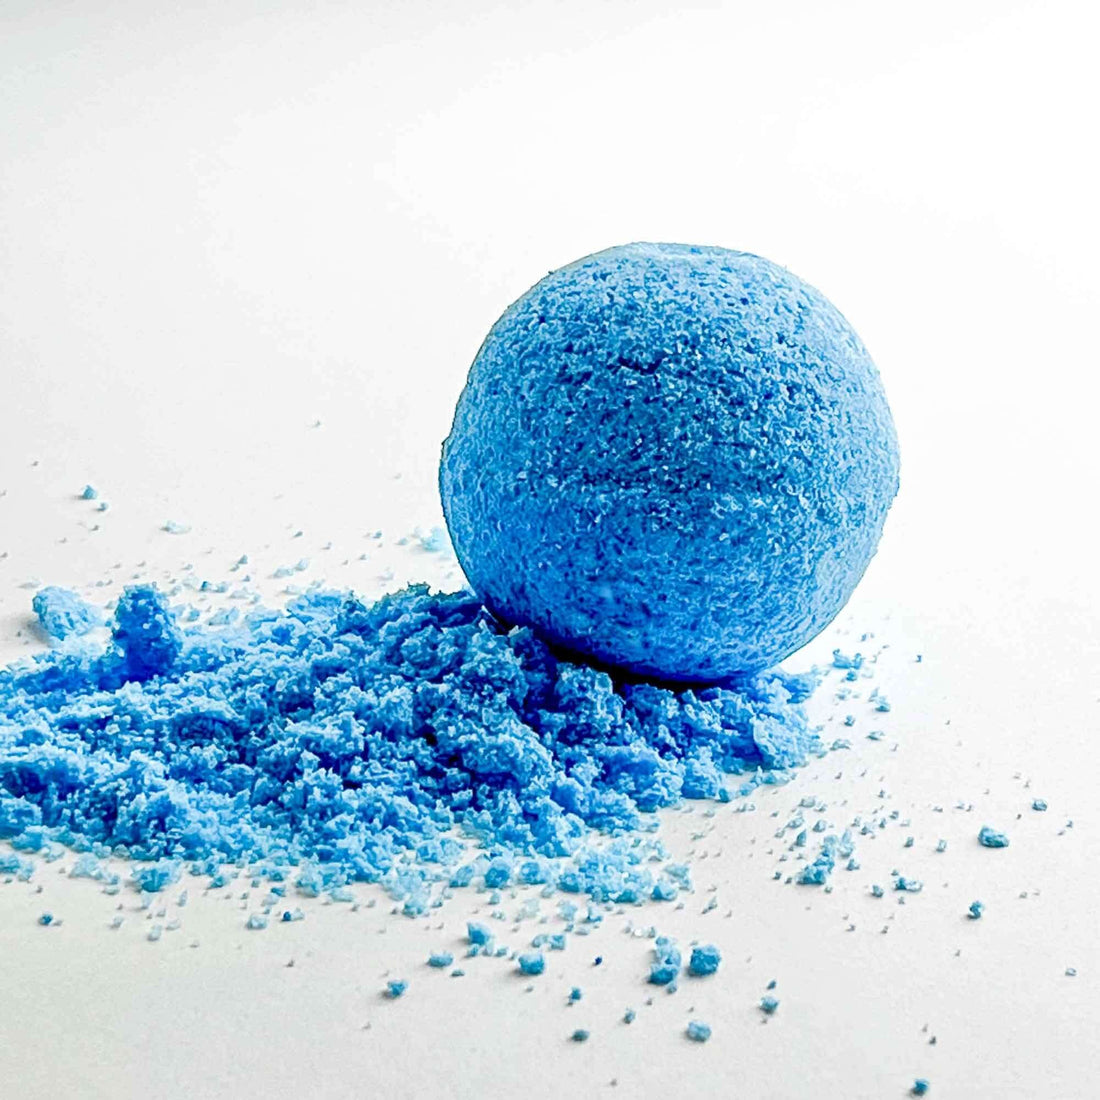 Indulge in a seaside escape with Caribbean Teakwood bath bombs - Handmade, Natural, and Soothing